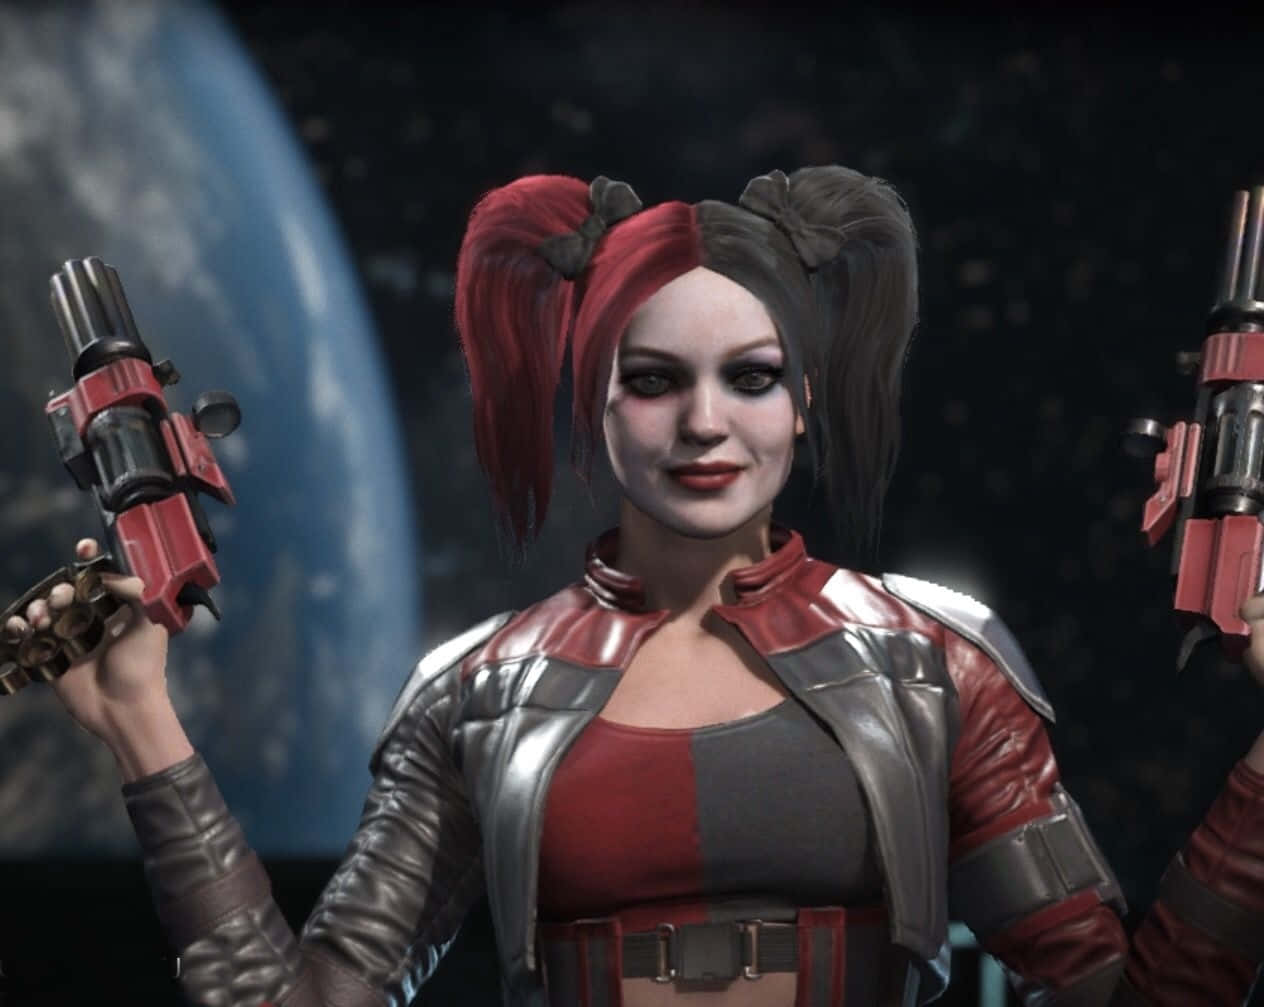 Harley Quinn, one of the most iconic villains in DC Comics, comes alive in Injustice 2. Wallpaper